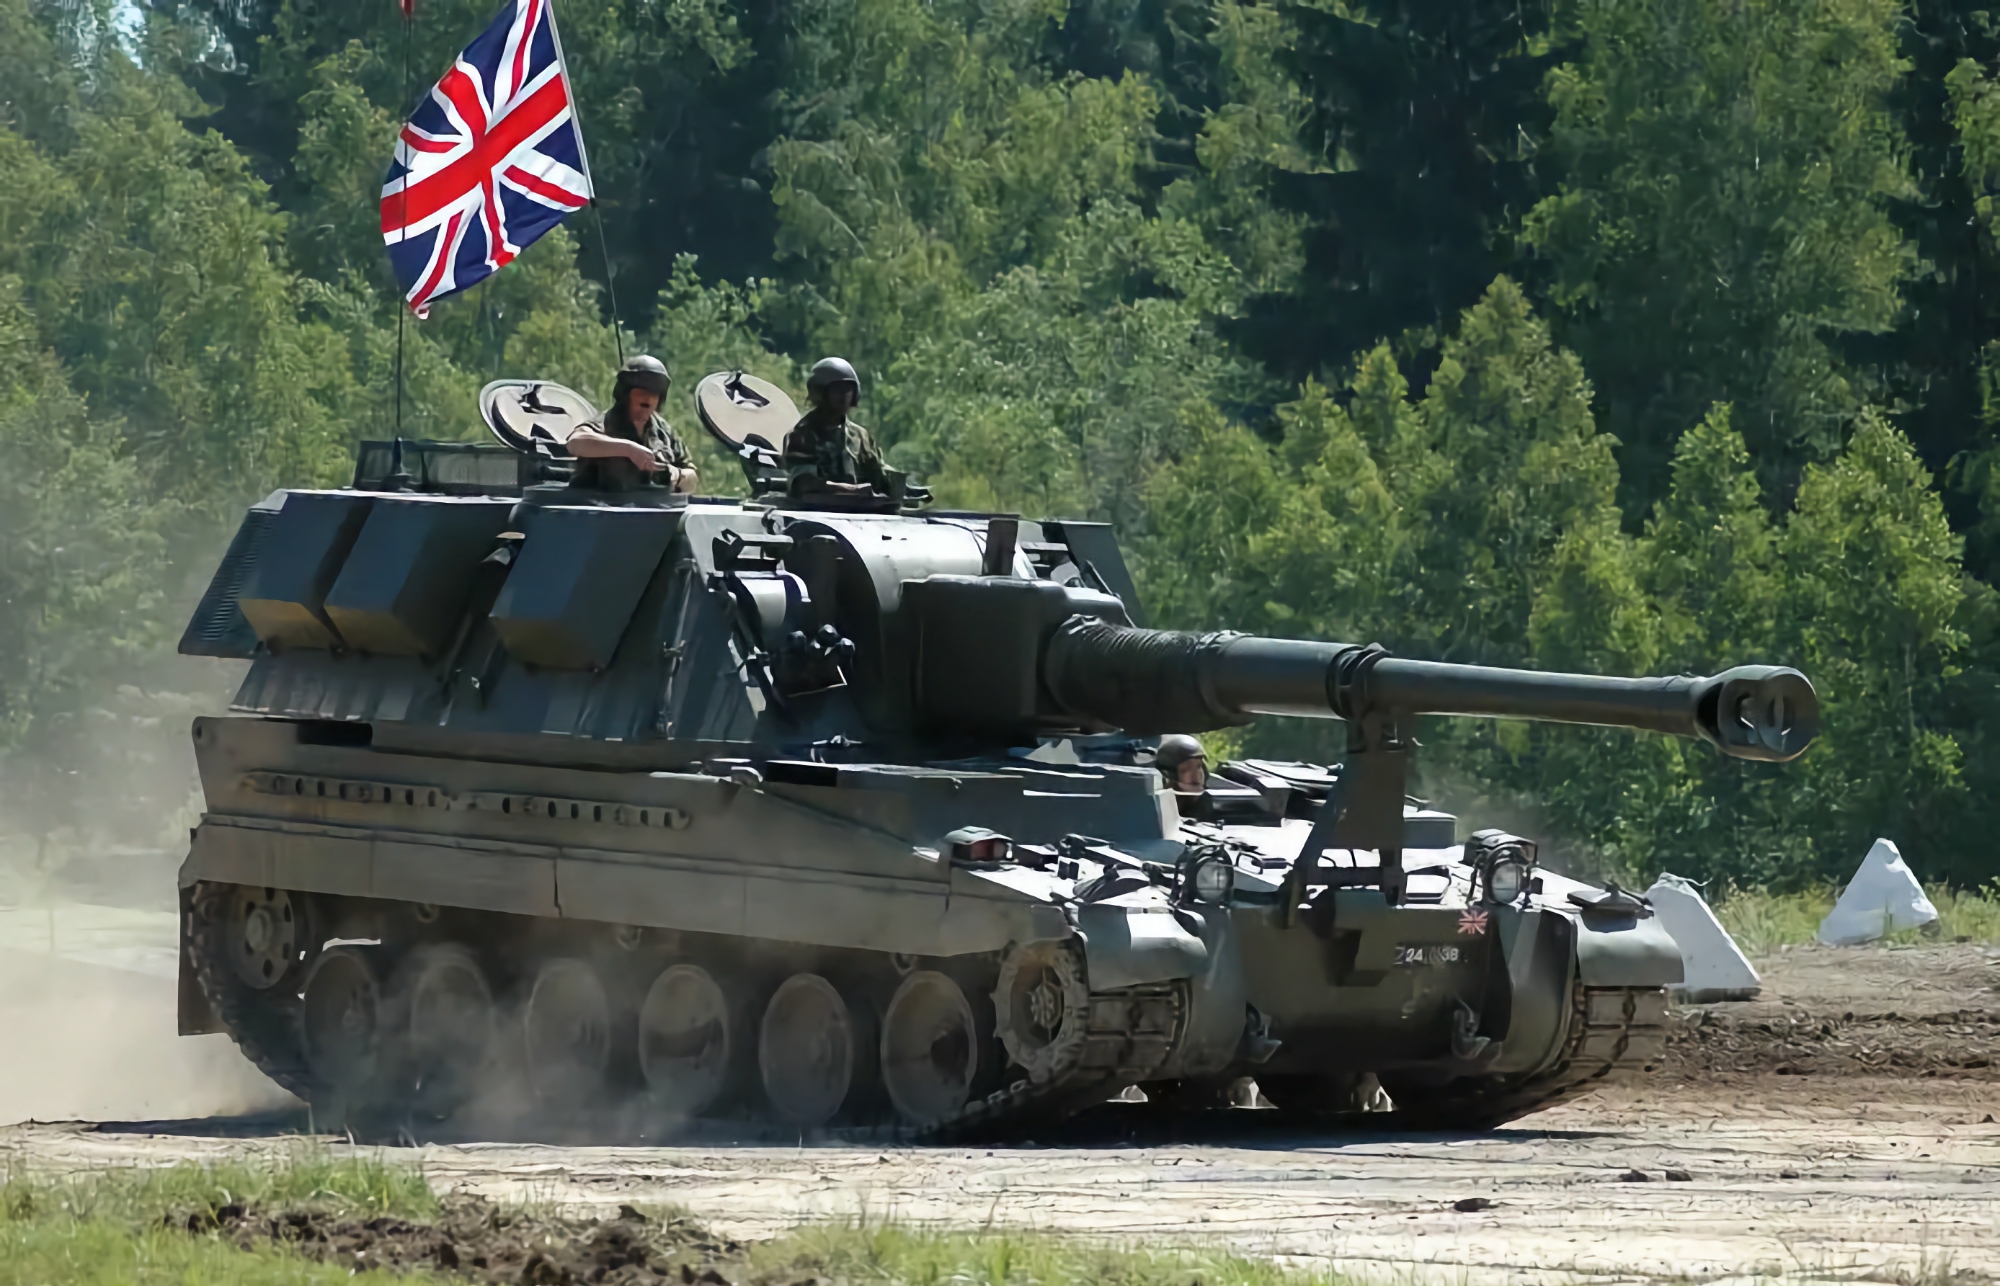 Ukrainian military will learn how to use British AS90 SAU in coming days